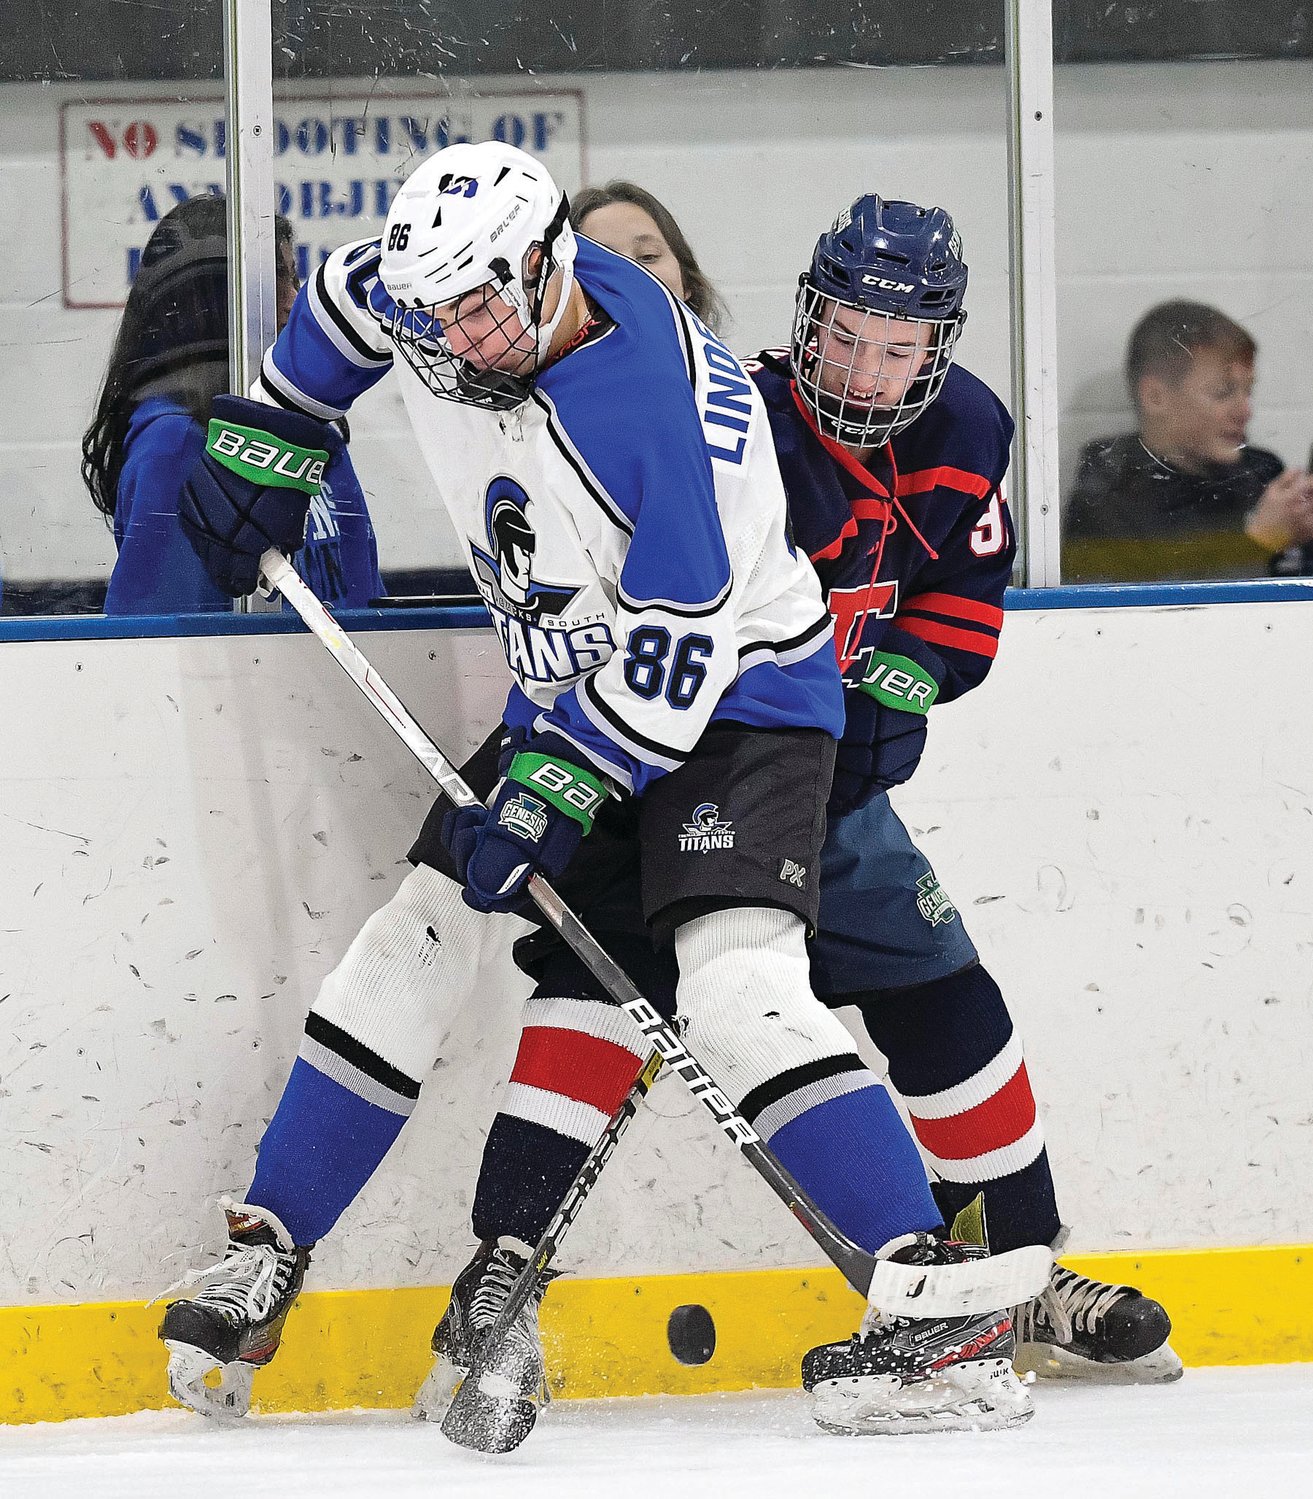 CB South’s DJ Lindenmuth and CB East’s Nick Young mix it up in the corner while battling for the puck.